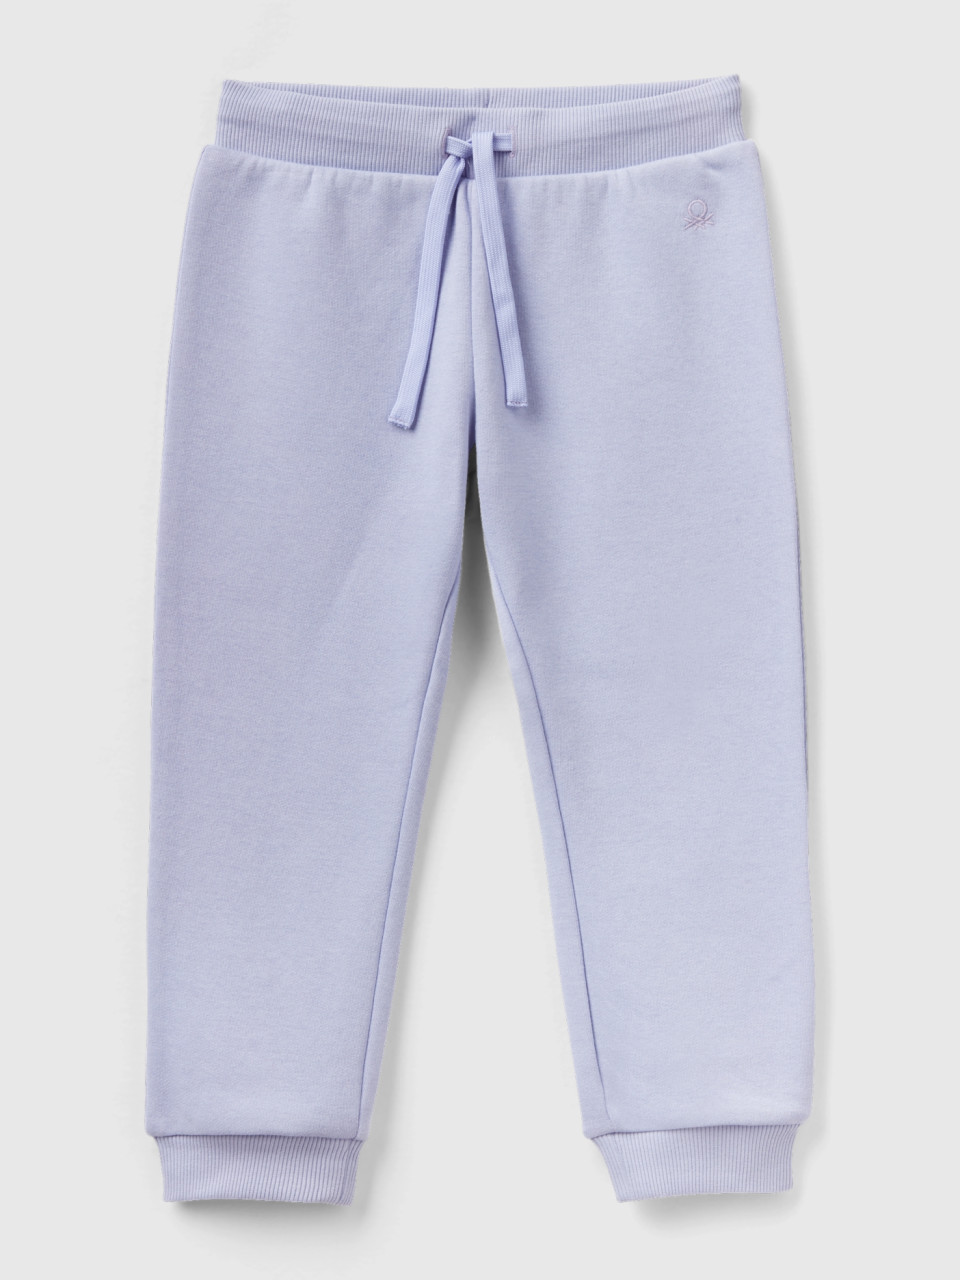 Benetton, Sweat Joggers With Drawstring, Lilac, Kids